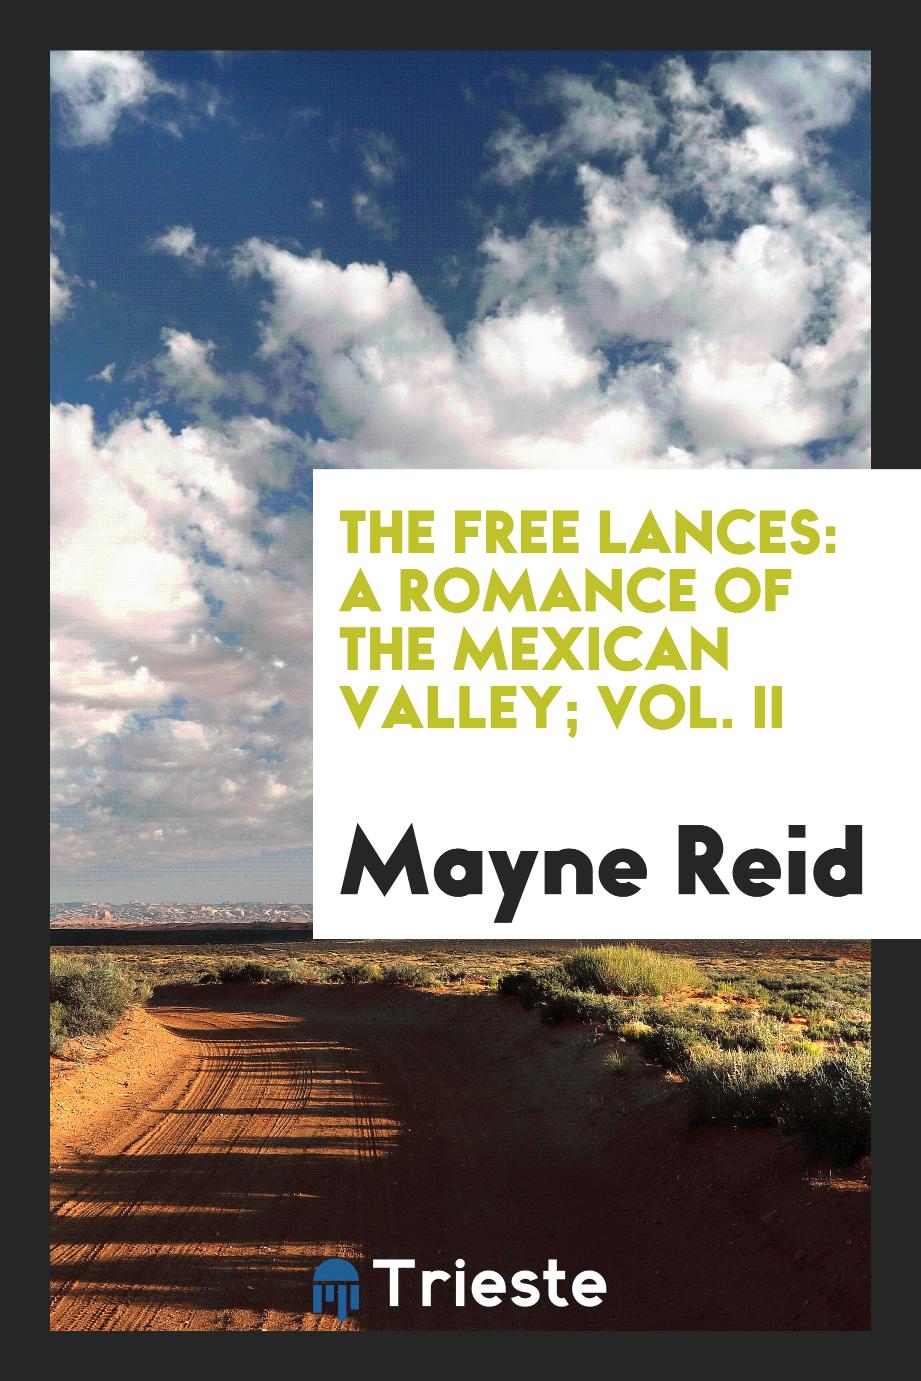 The free lances: a romance of the Mexican valley; Vol. II